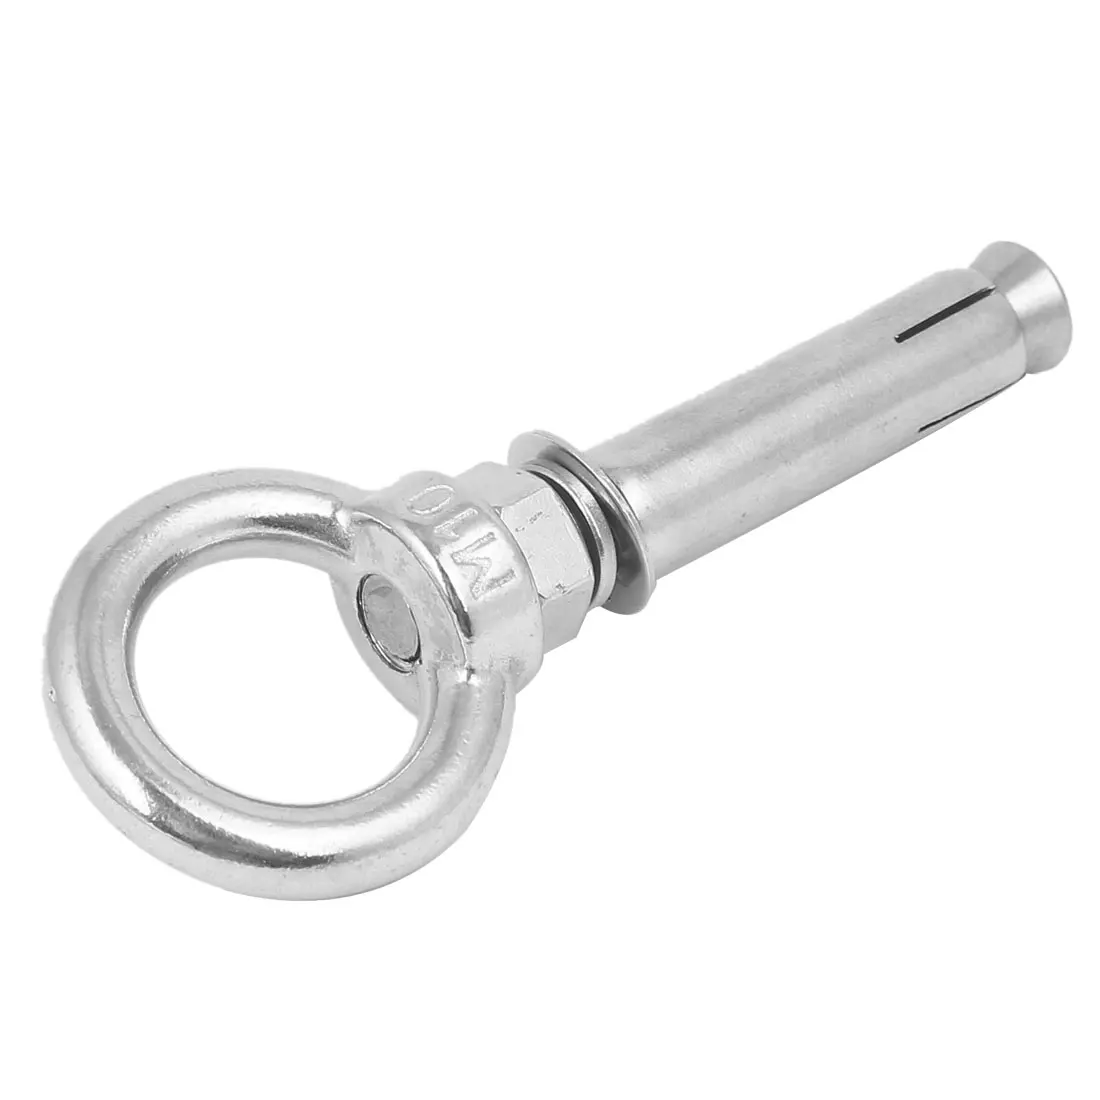 M10 x 80mm 304 Stainless Steel Ring Lifting Anchor Expansion Hook Eye Bolt